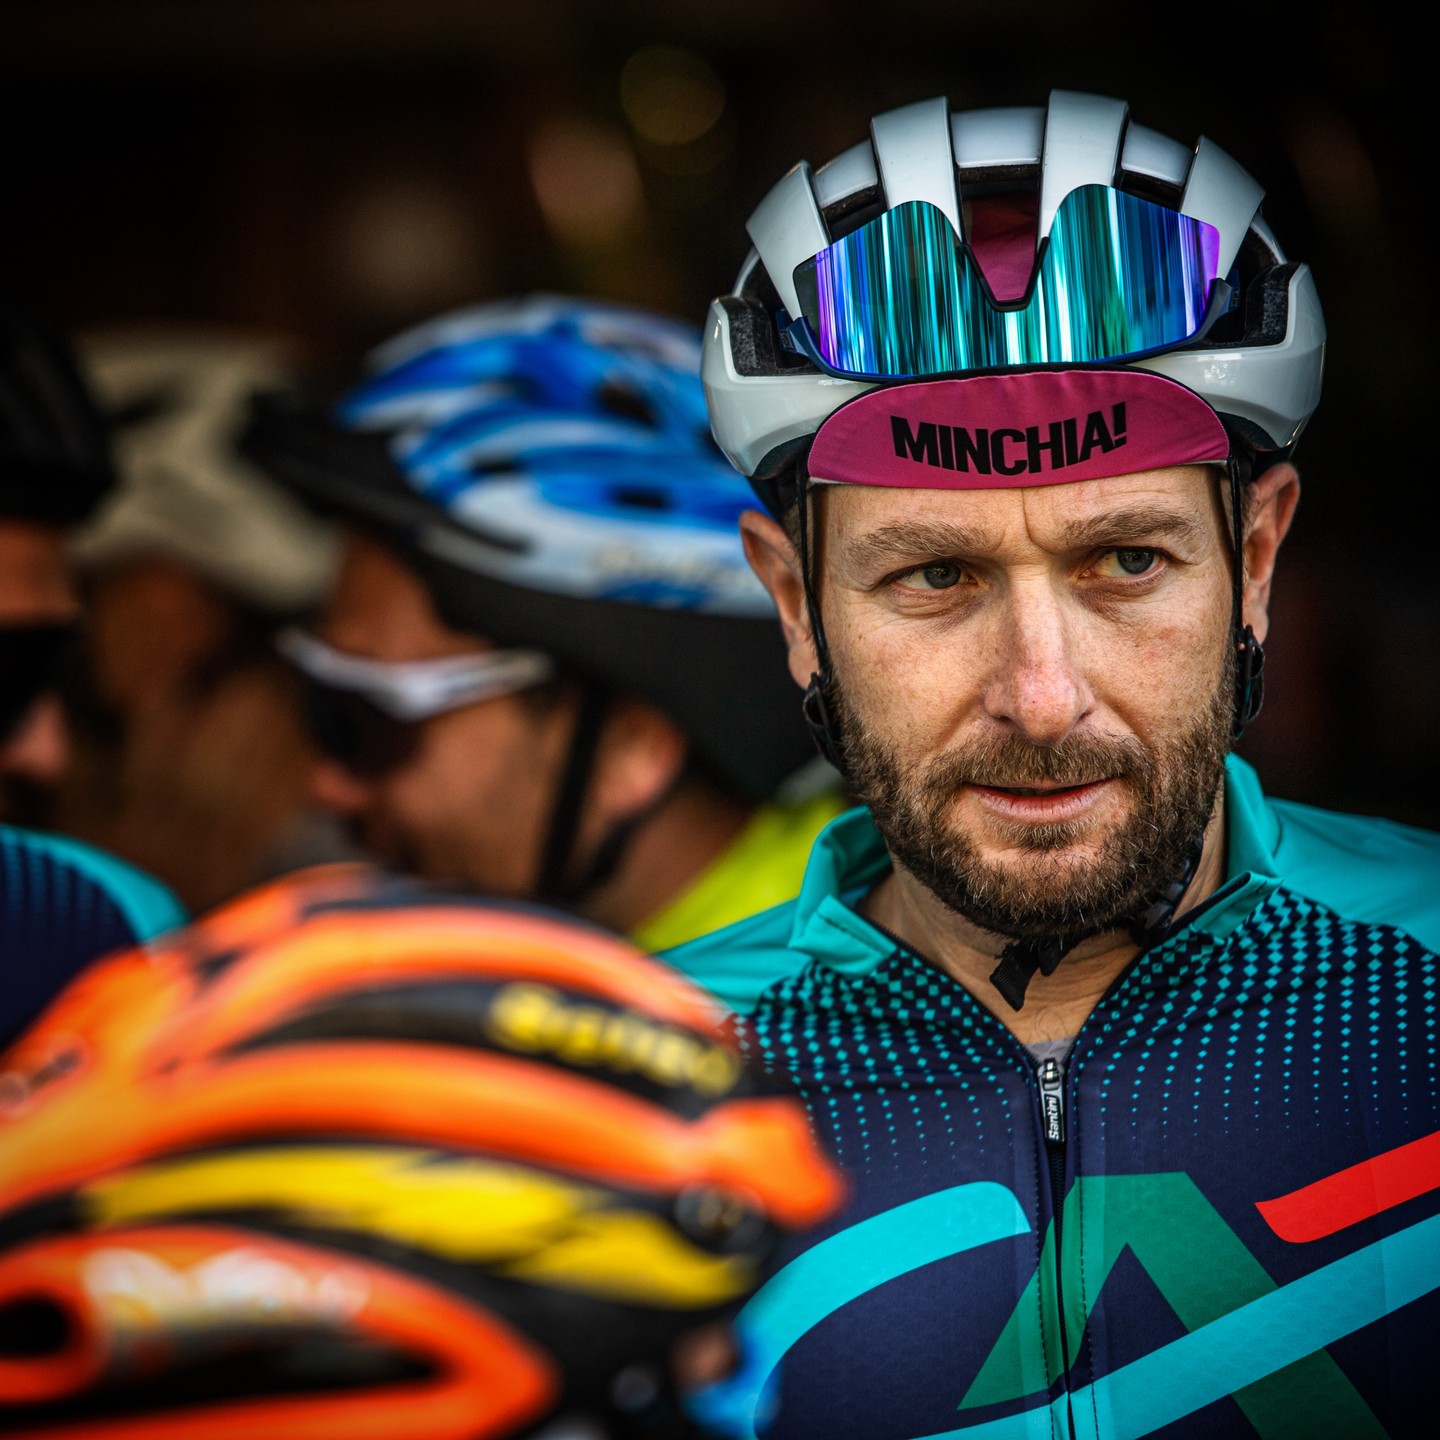 That's the face you must have when you have to start a Camp and you have not trained at all...
Luckily we have strong guides like @vincenzo_tomasello_ @antoniolimoli and @peppecucucci